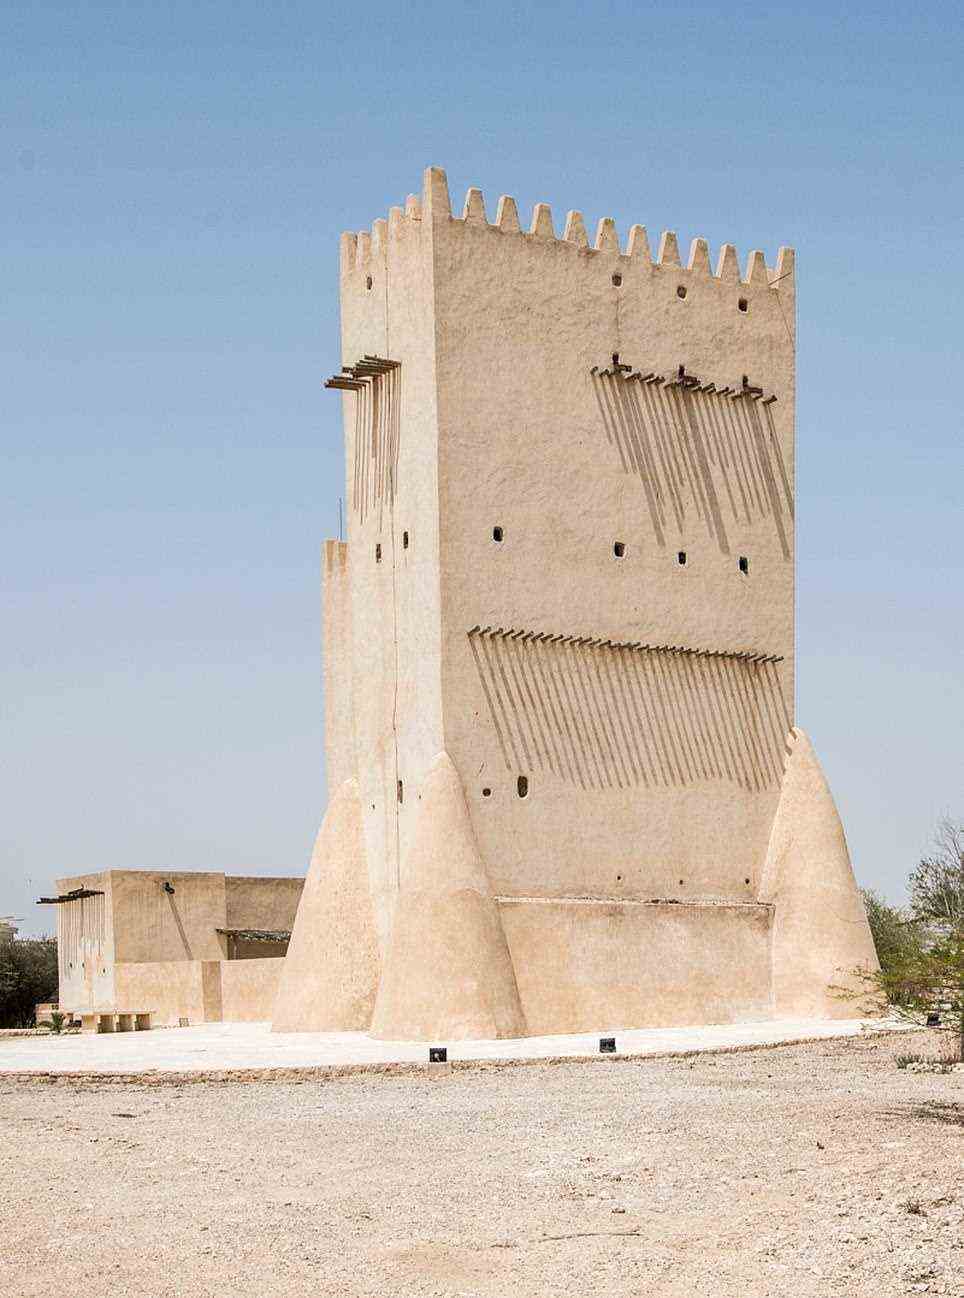 BARZAN TOWERS: Bringing them back to their former glory, the Barzan Towers underwent a restoration in 2003